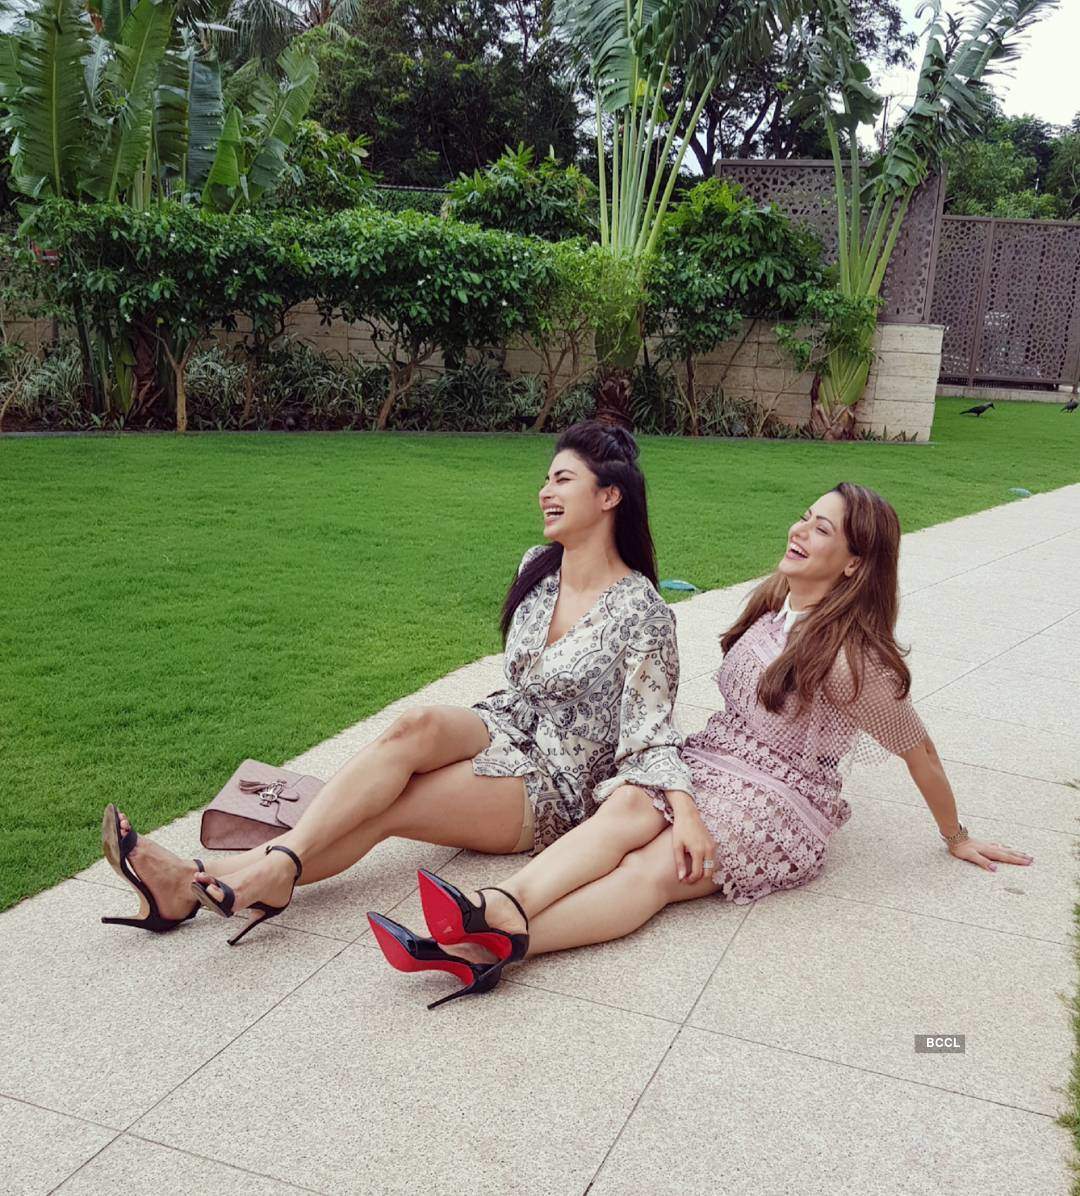 Aamna Sharif sets the temperature soaring with these pictures!